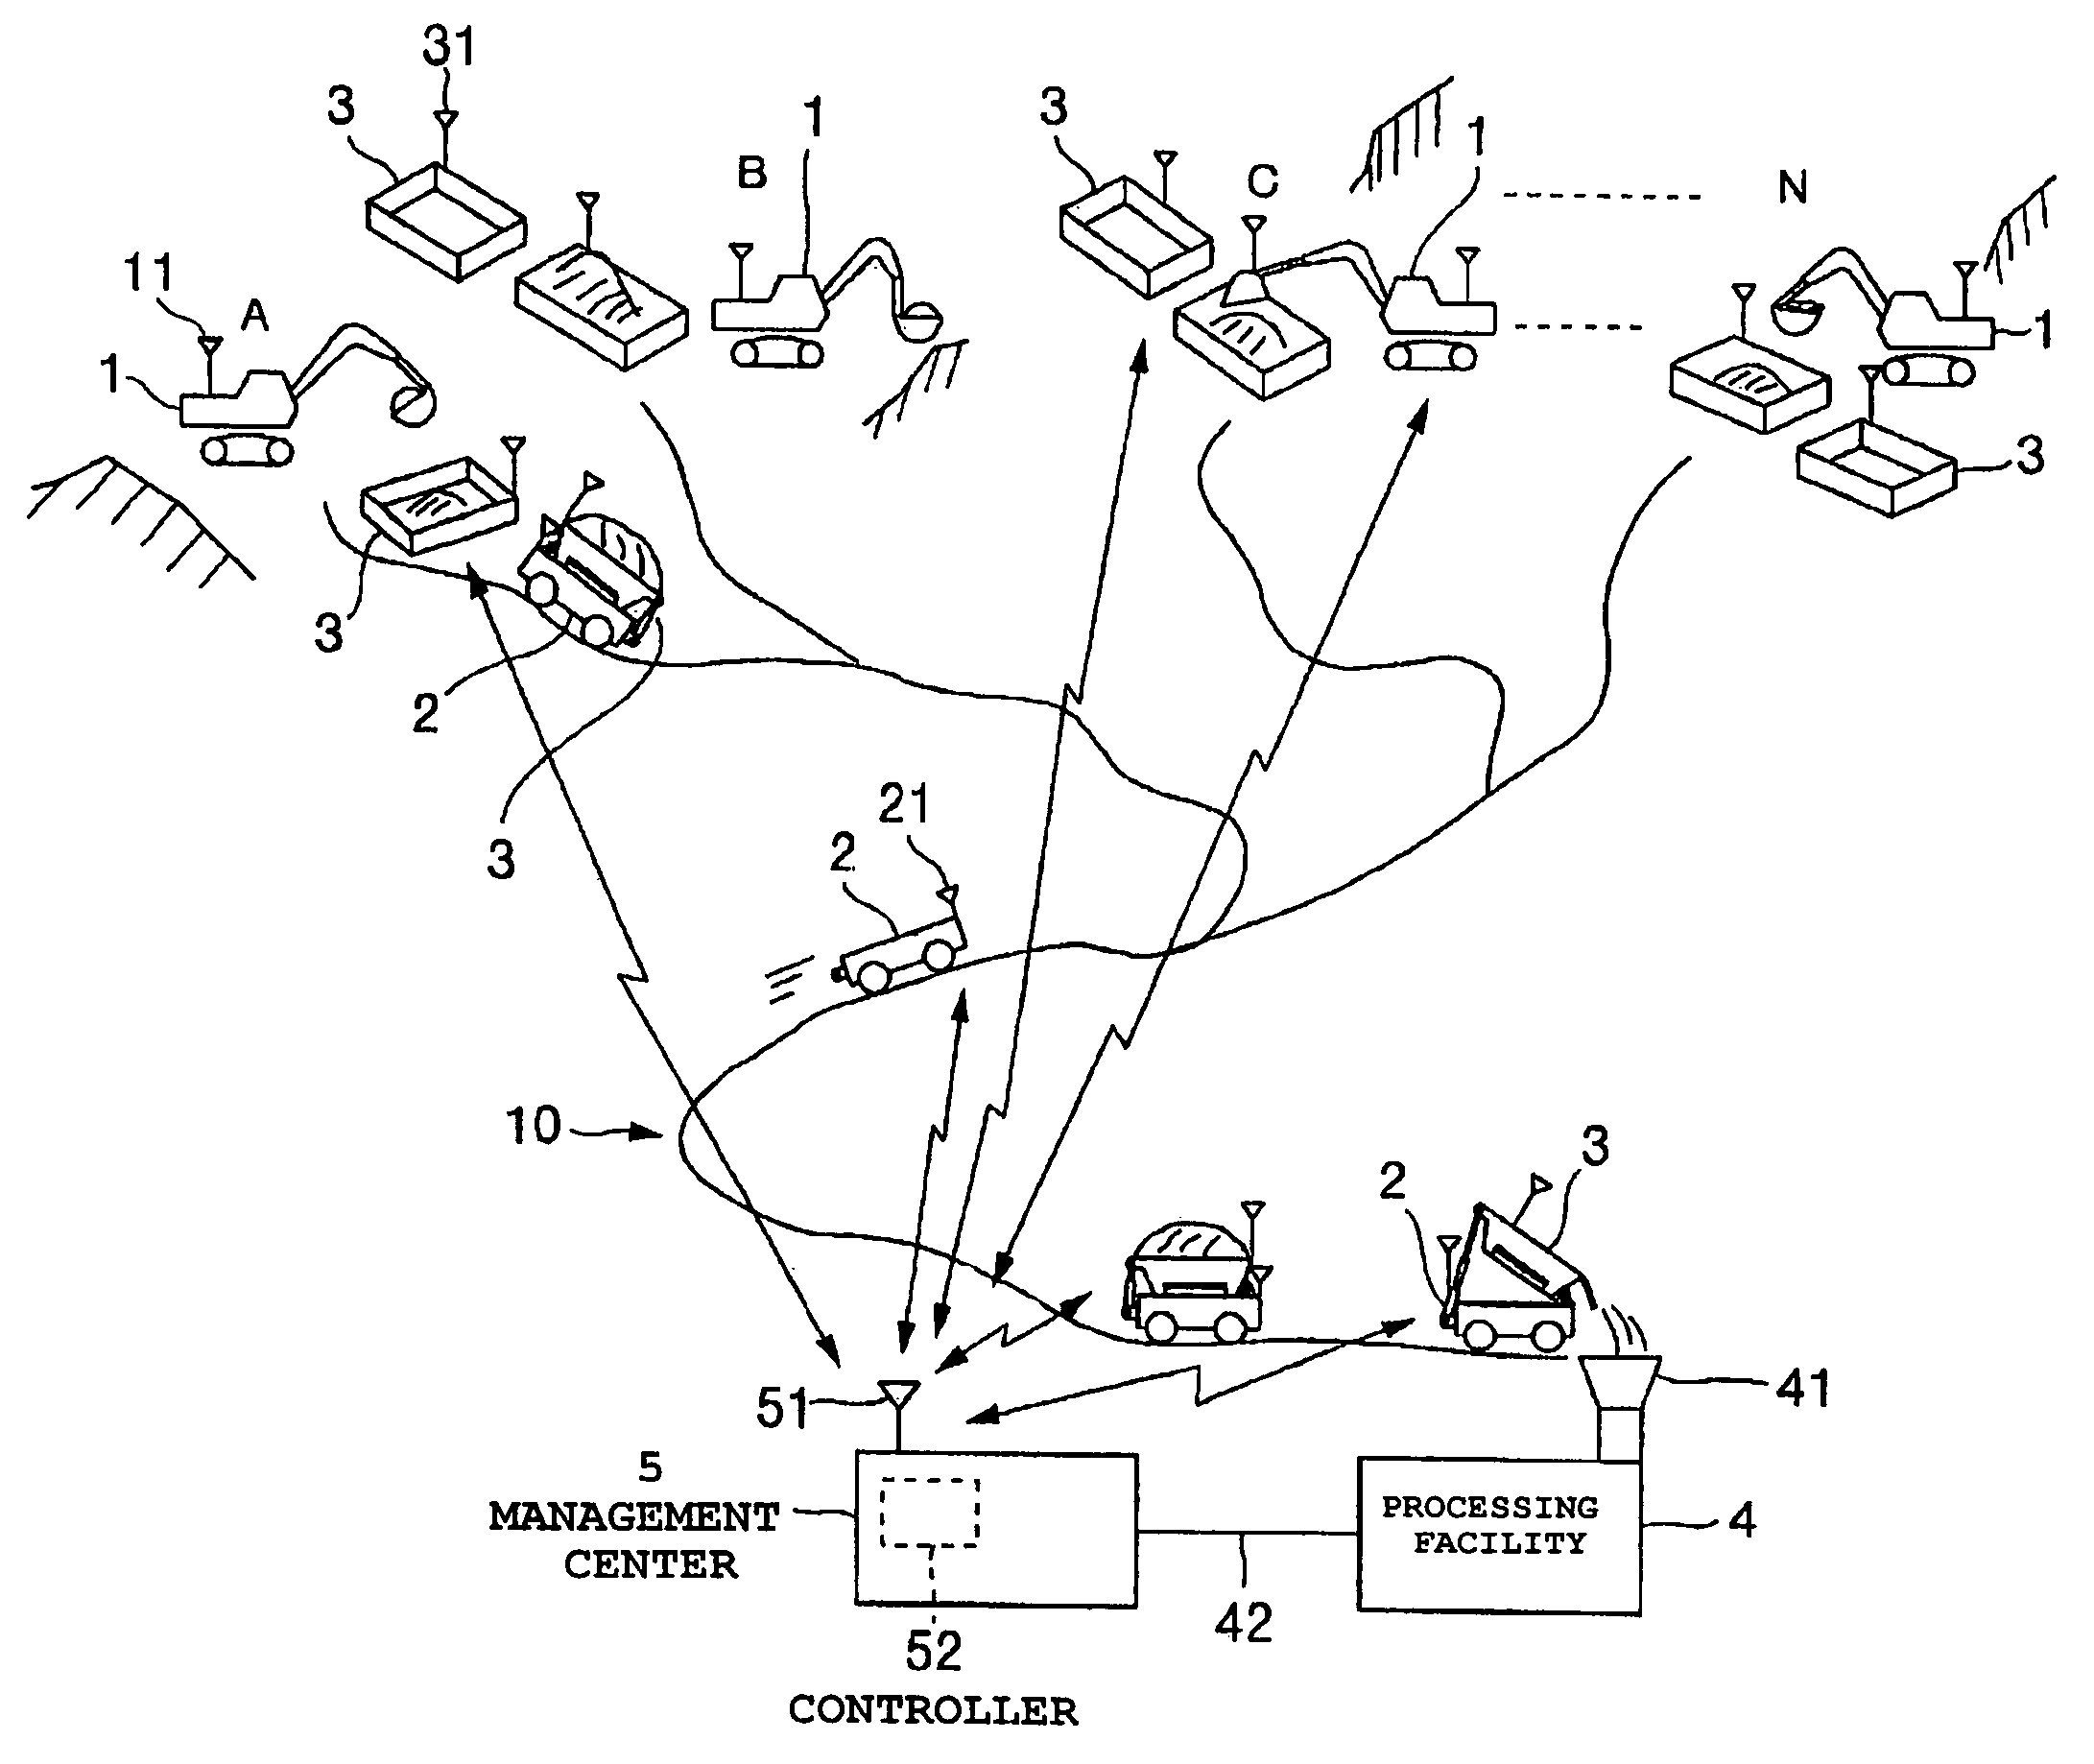 Mine transportation management system and method using separate ore vessels and transport vehicles managed via communication signals